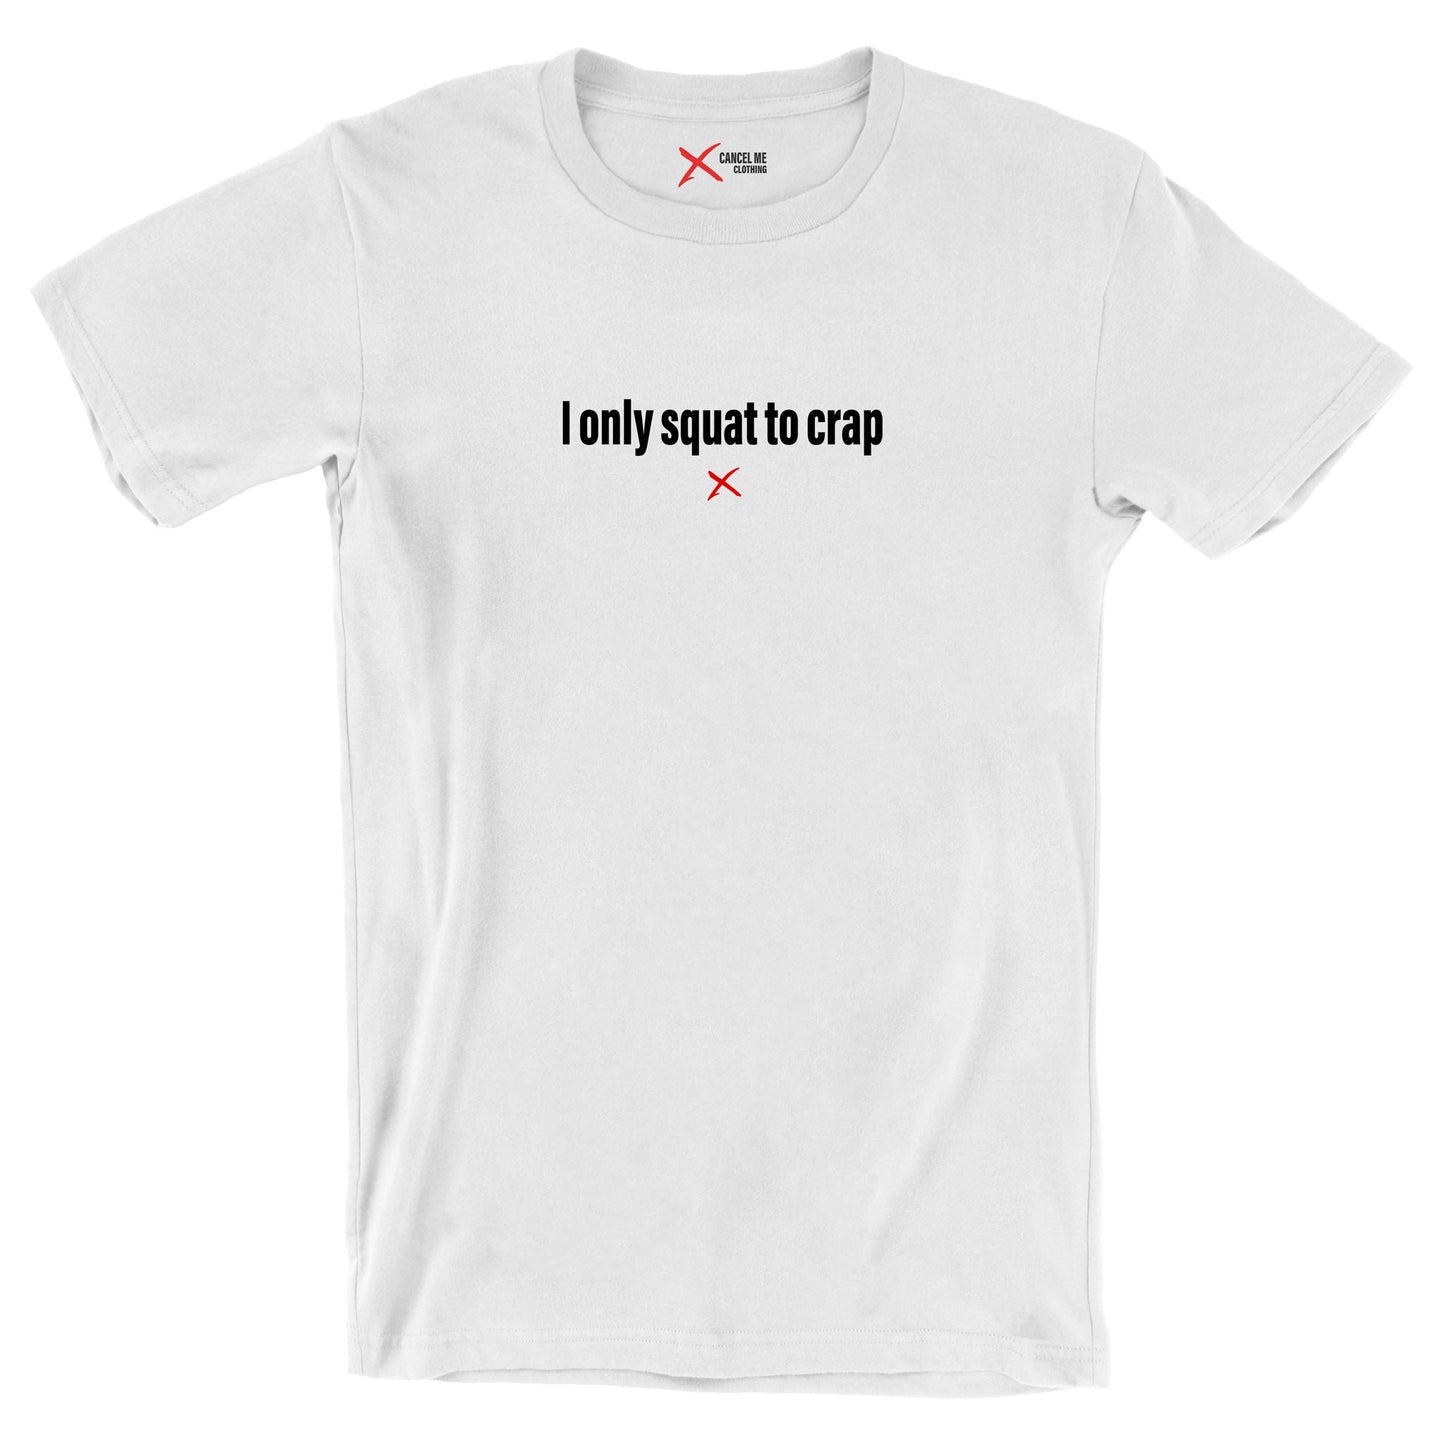 I only squat to crap - Shirt